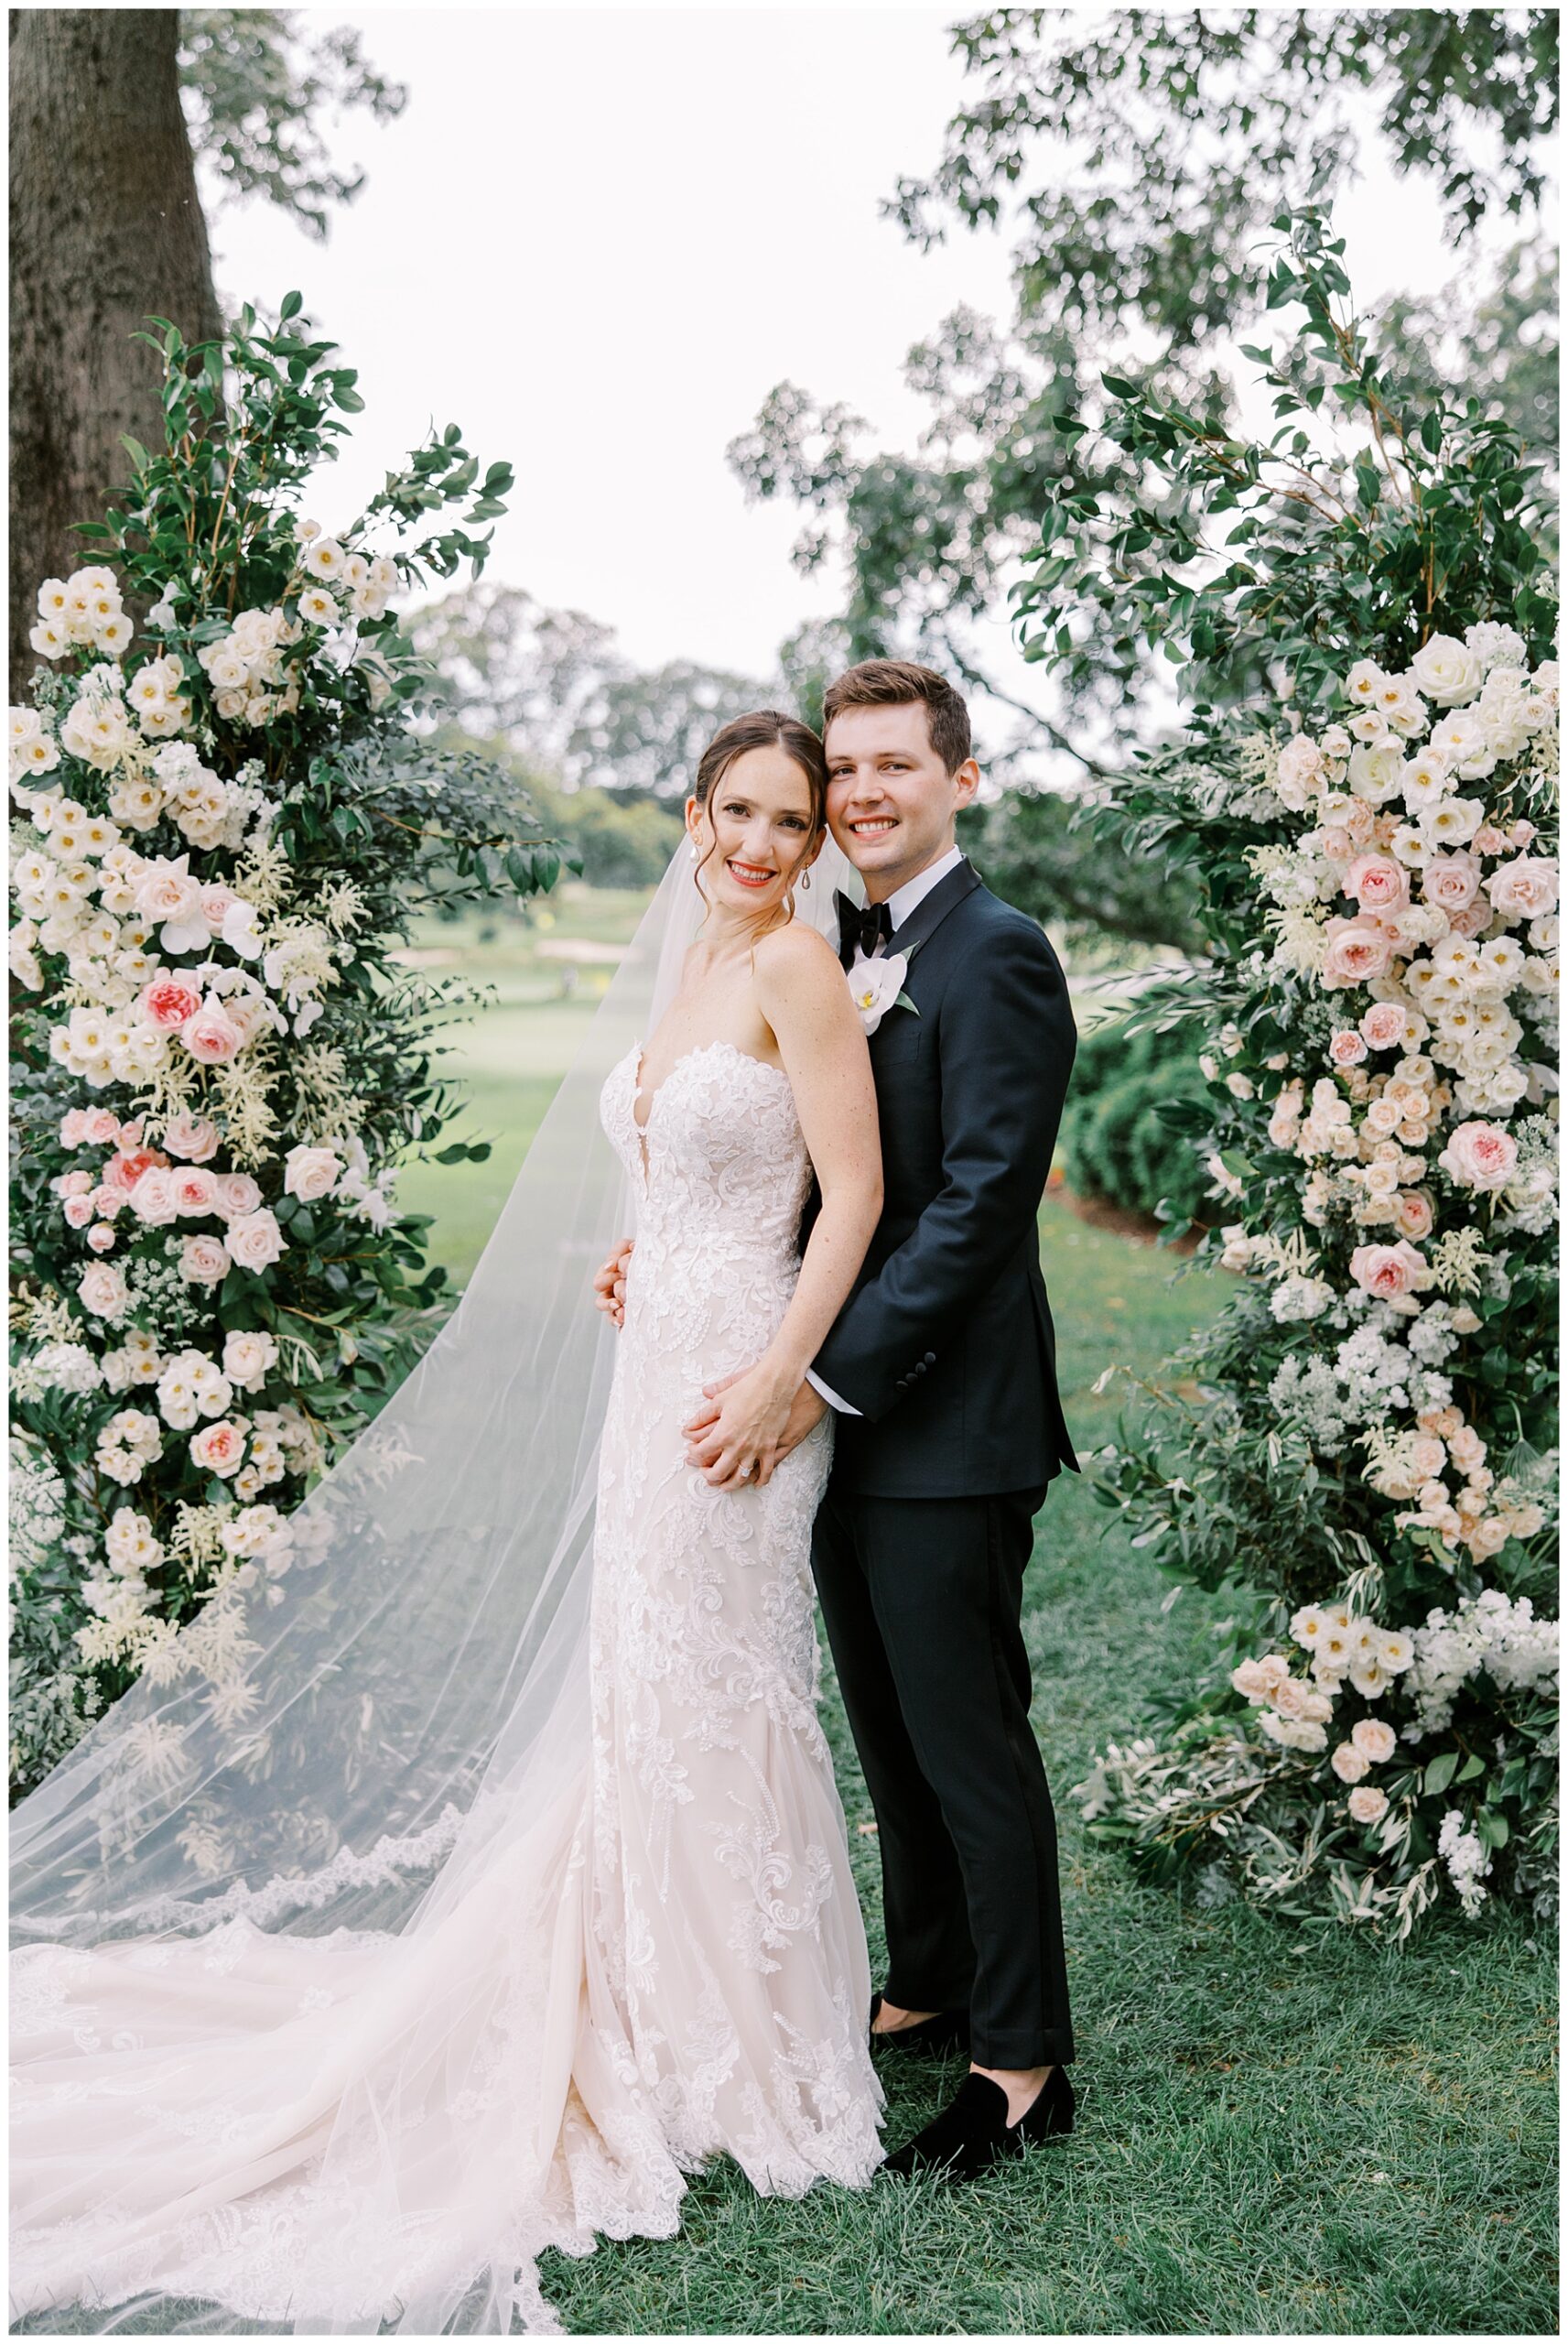 wedding portraits from romantic floral centered wedding at The Country Club in Brookline, MA